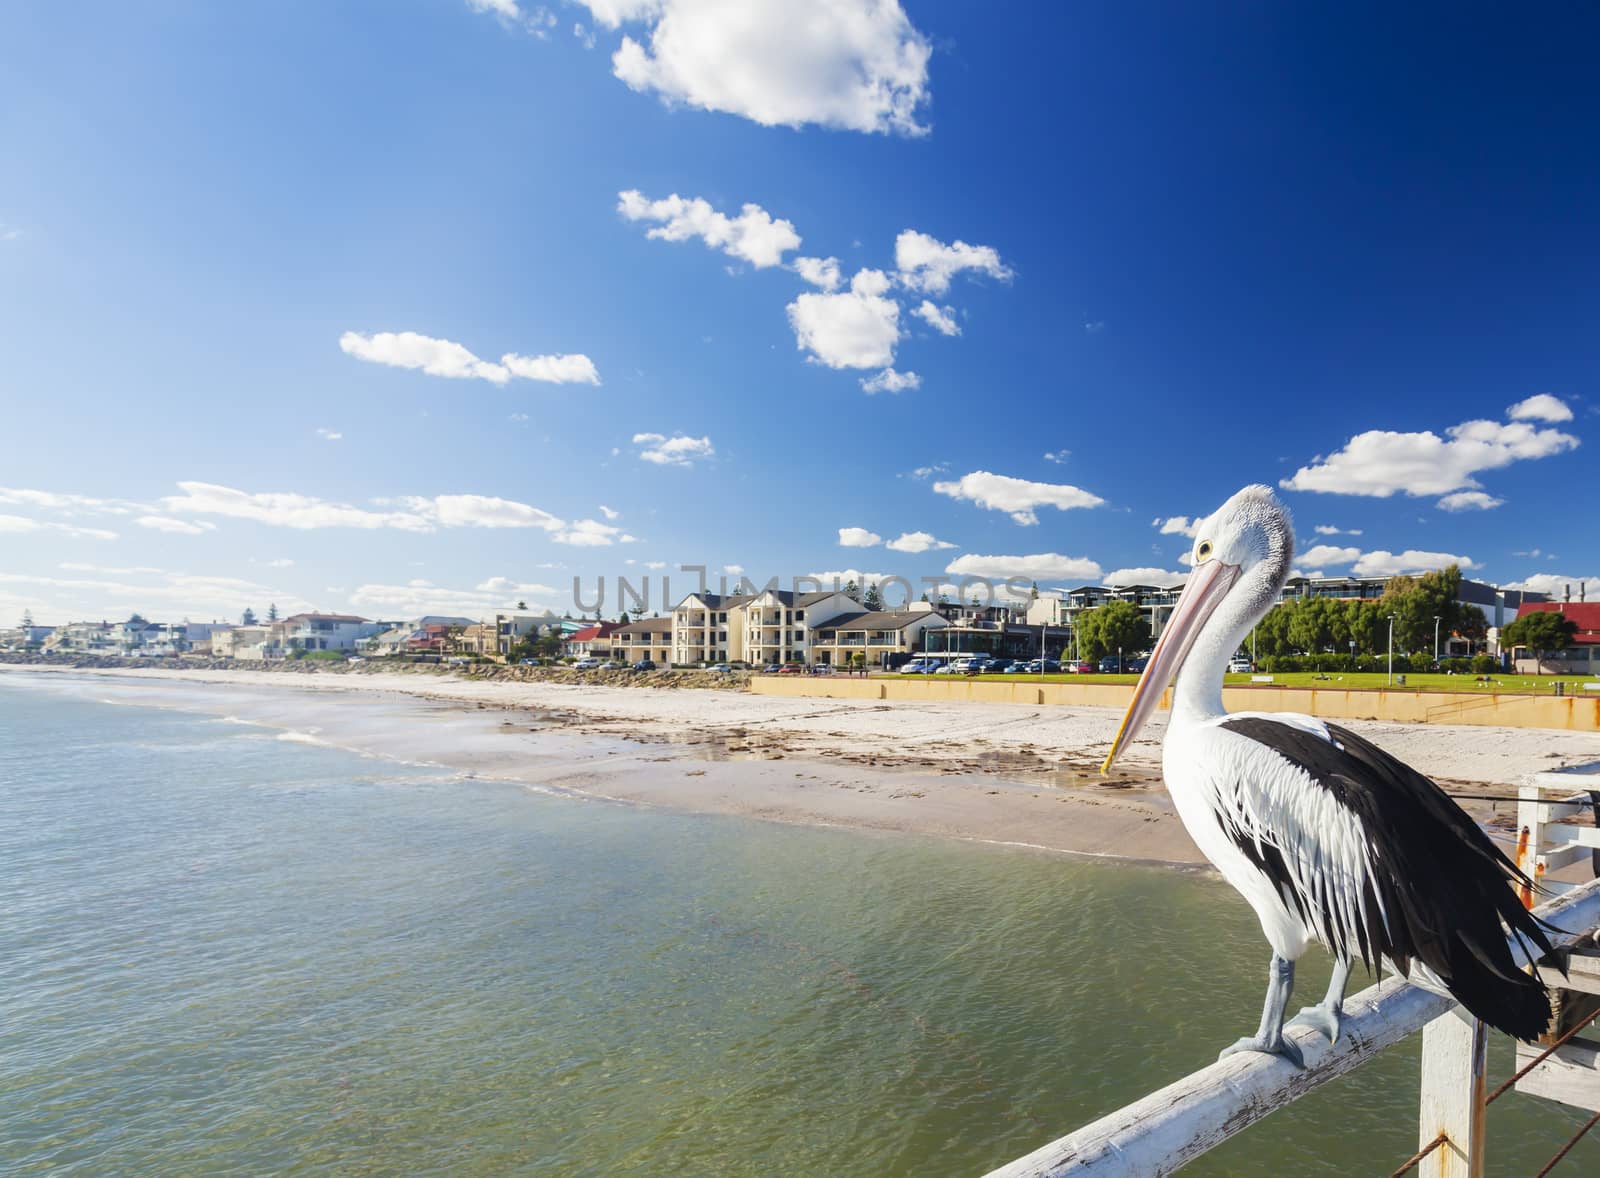 Pelican at a jetty in a beachside suburb in Adelaide, South Australia